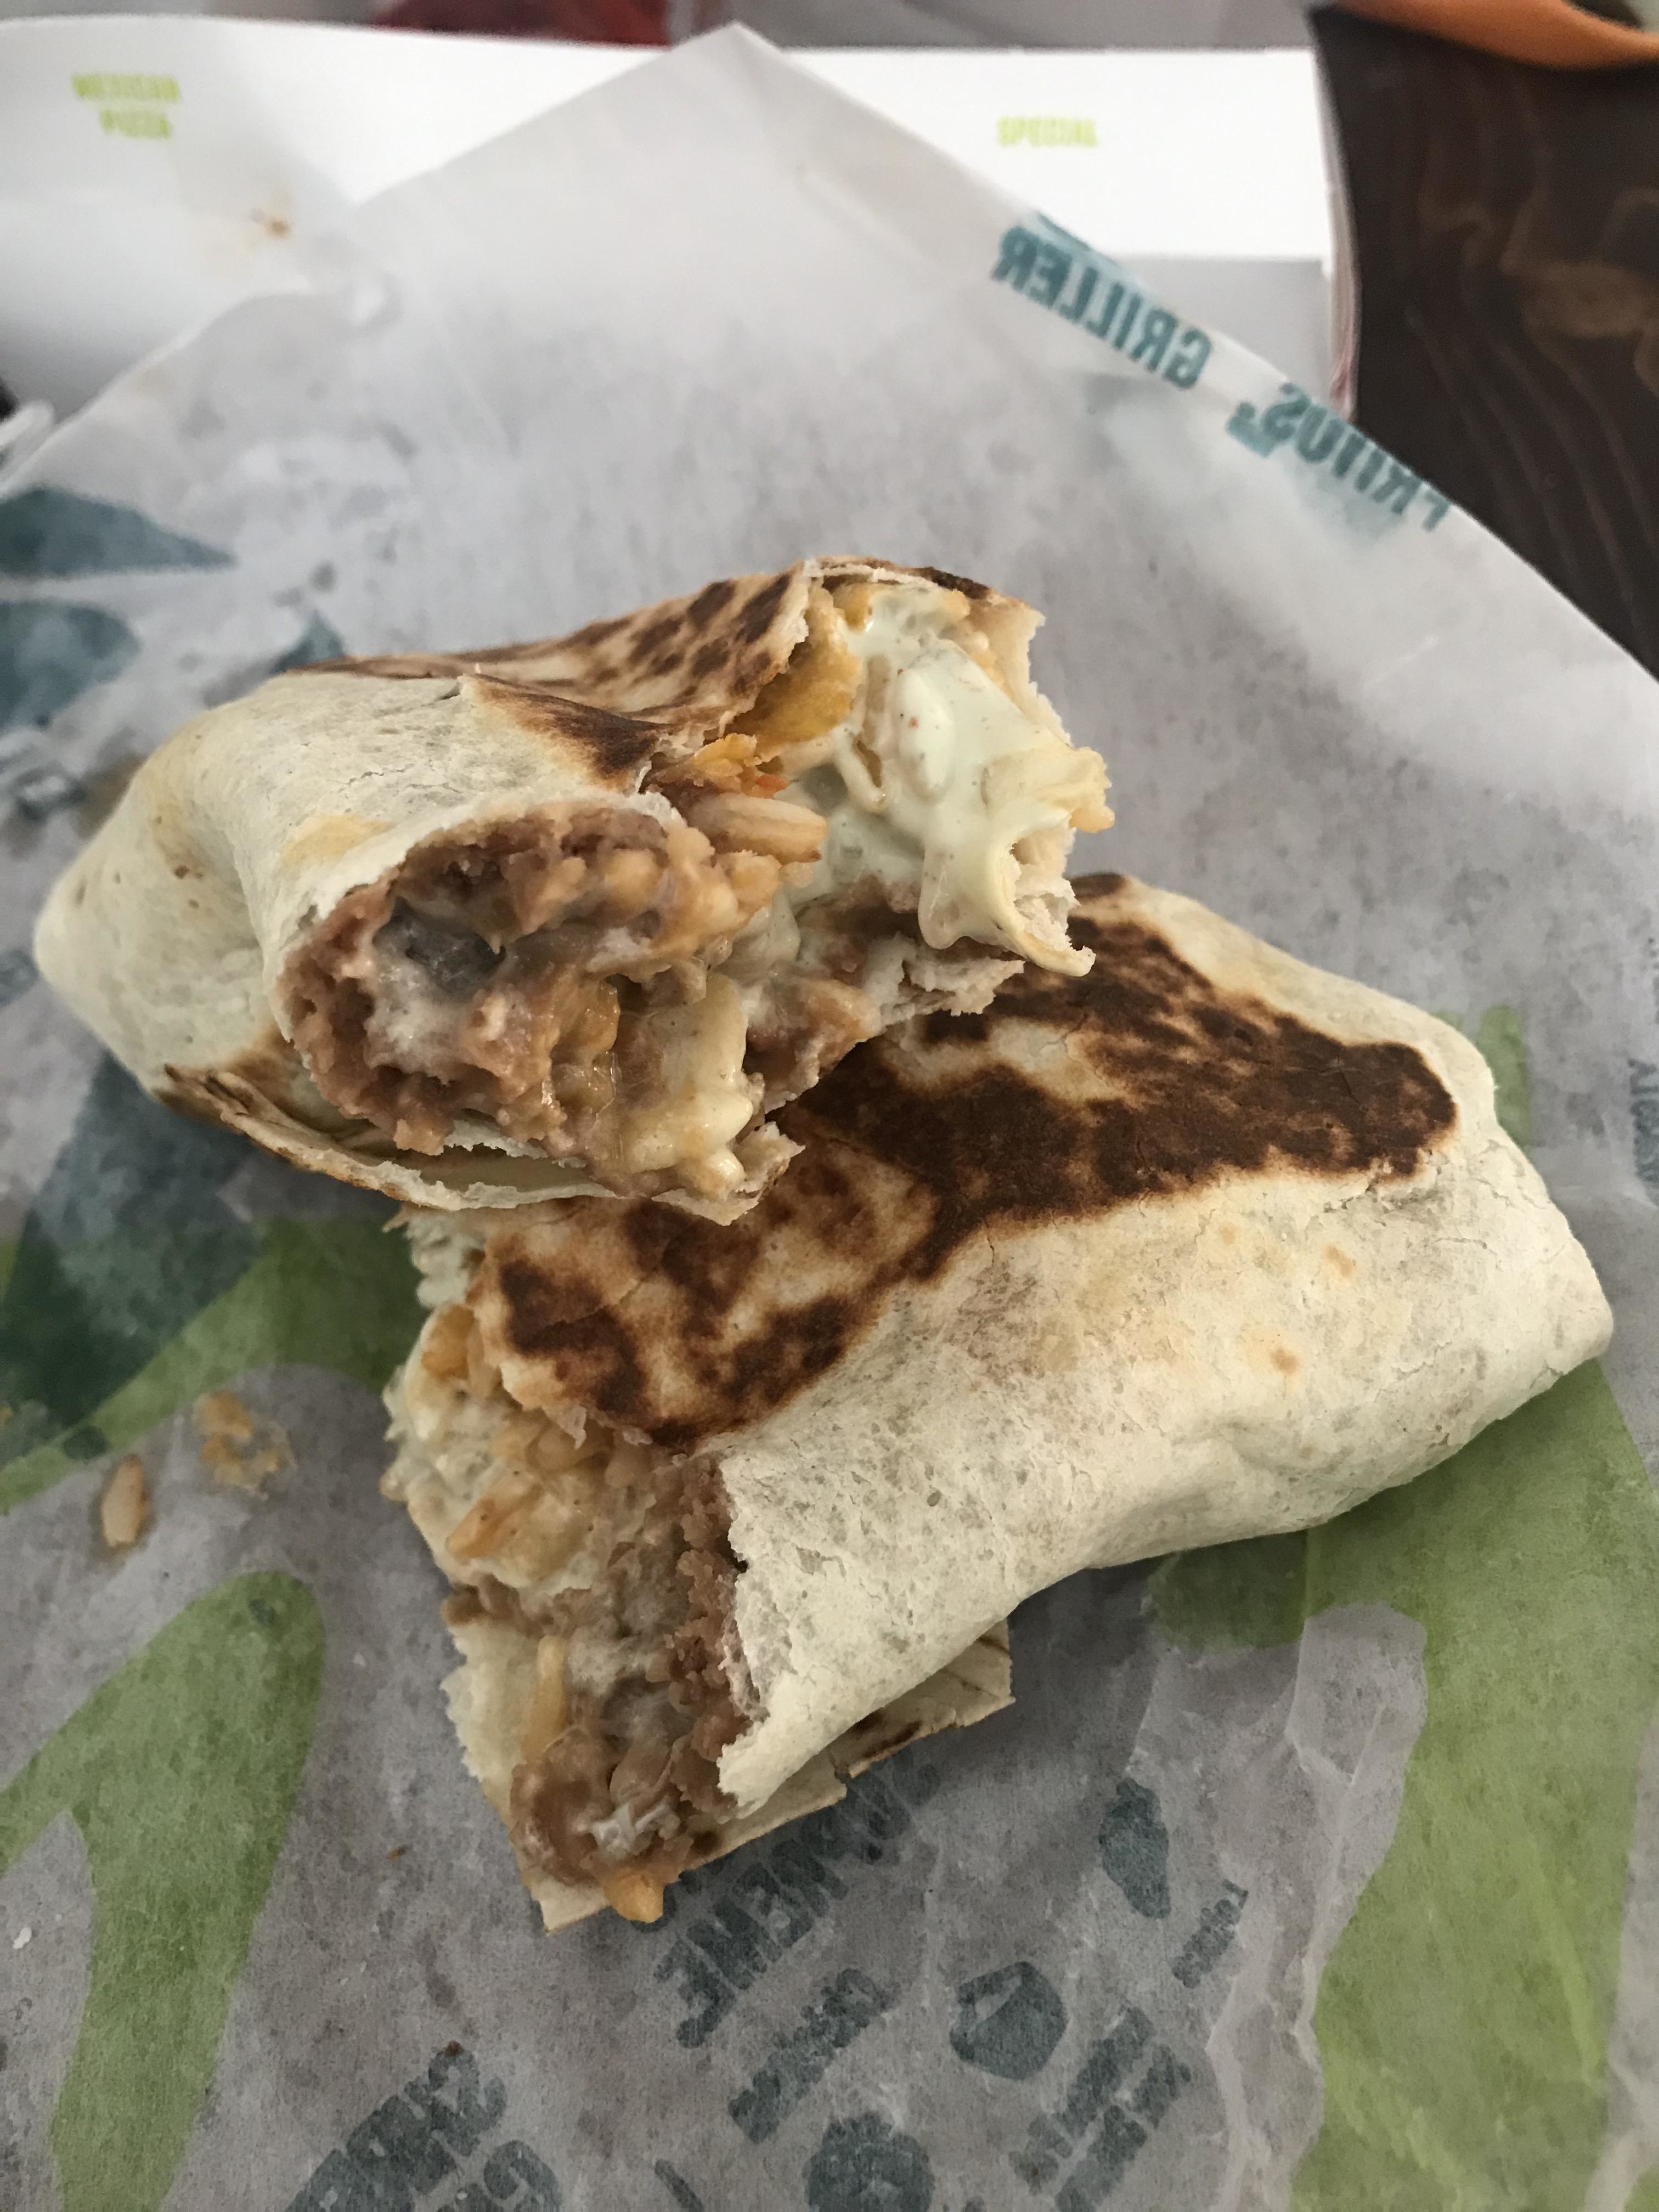 A close-up image of a half-eaten grilled burrito, showing its meaty and cheesy filling. The burrito is placed on a wrapper with text on it